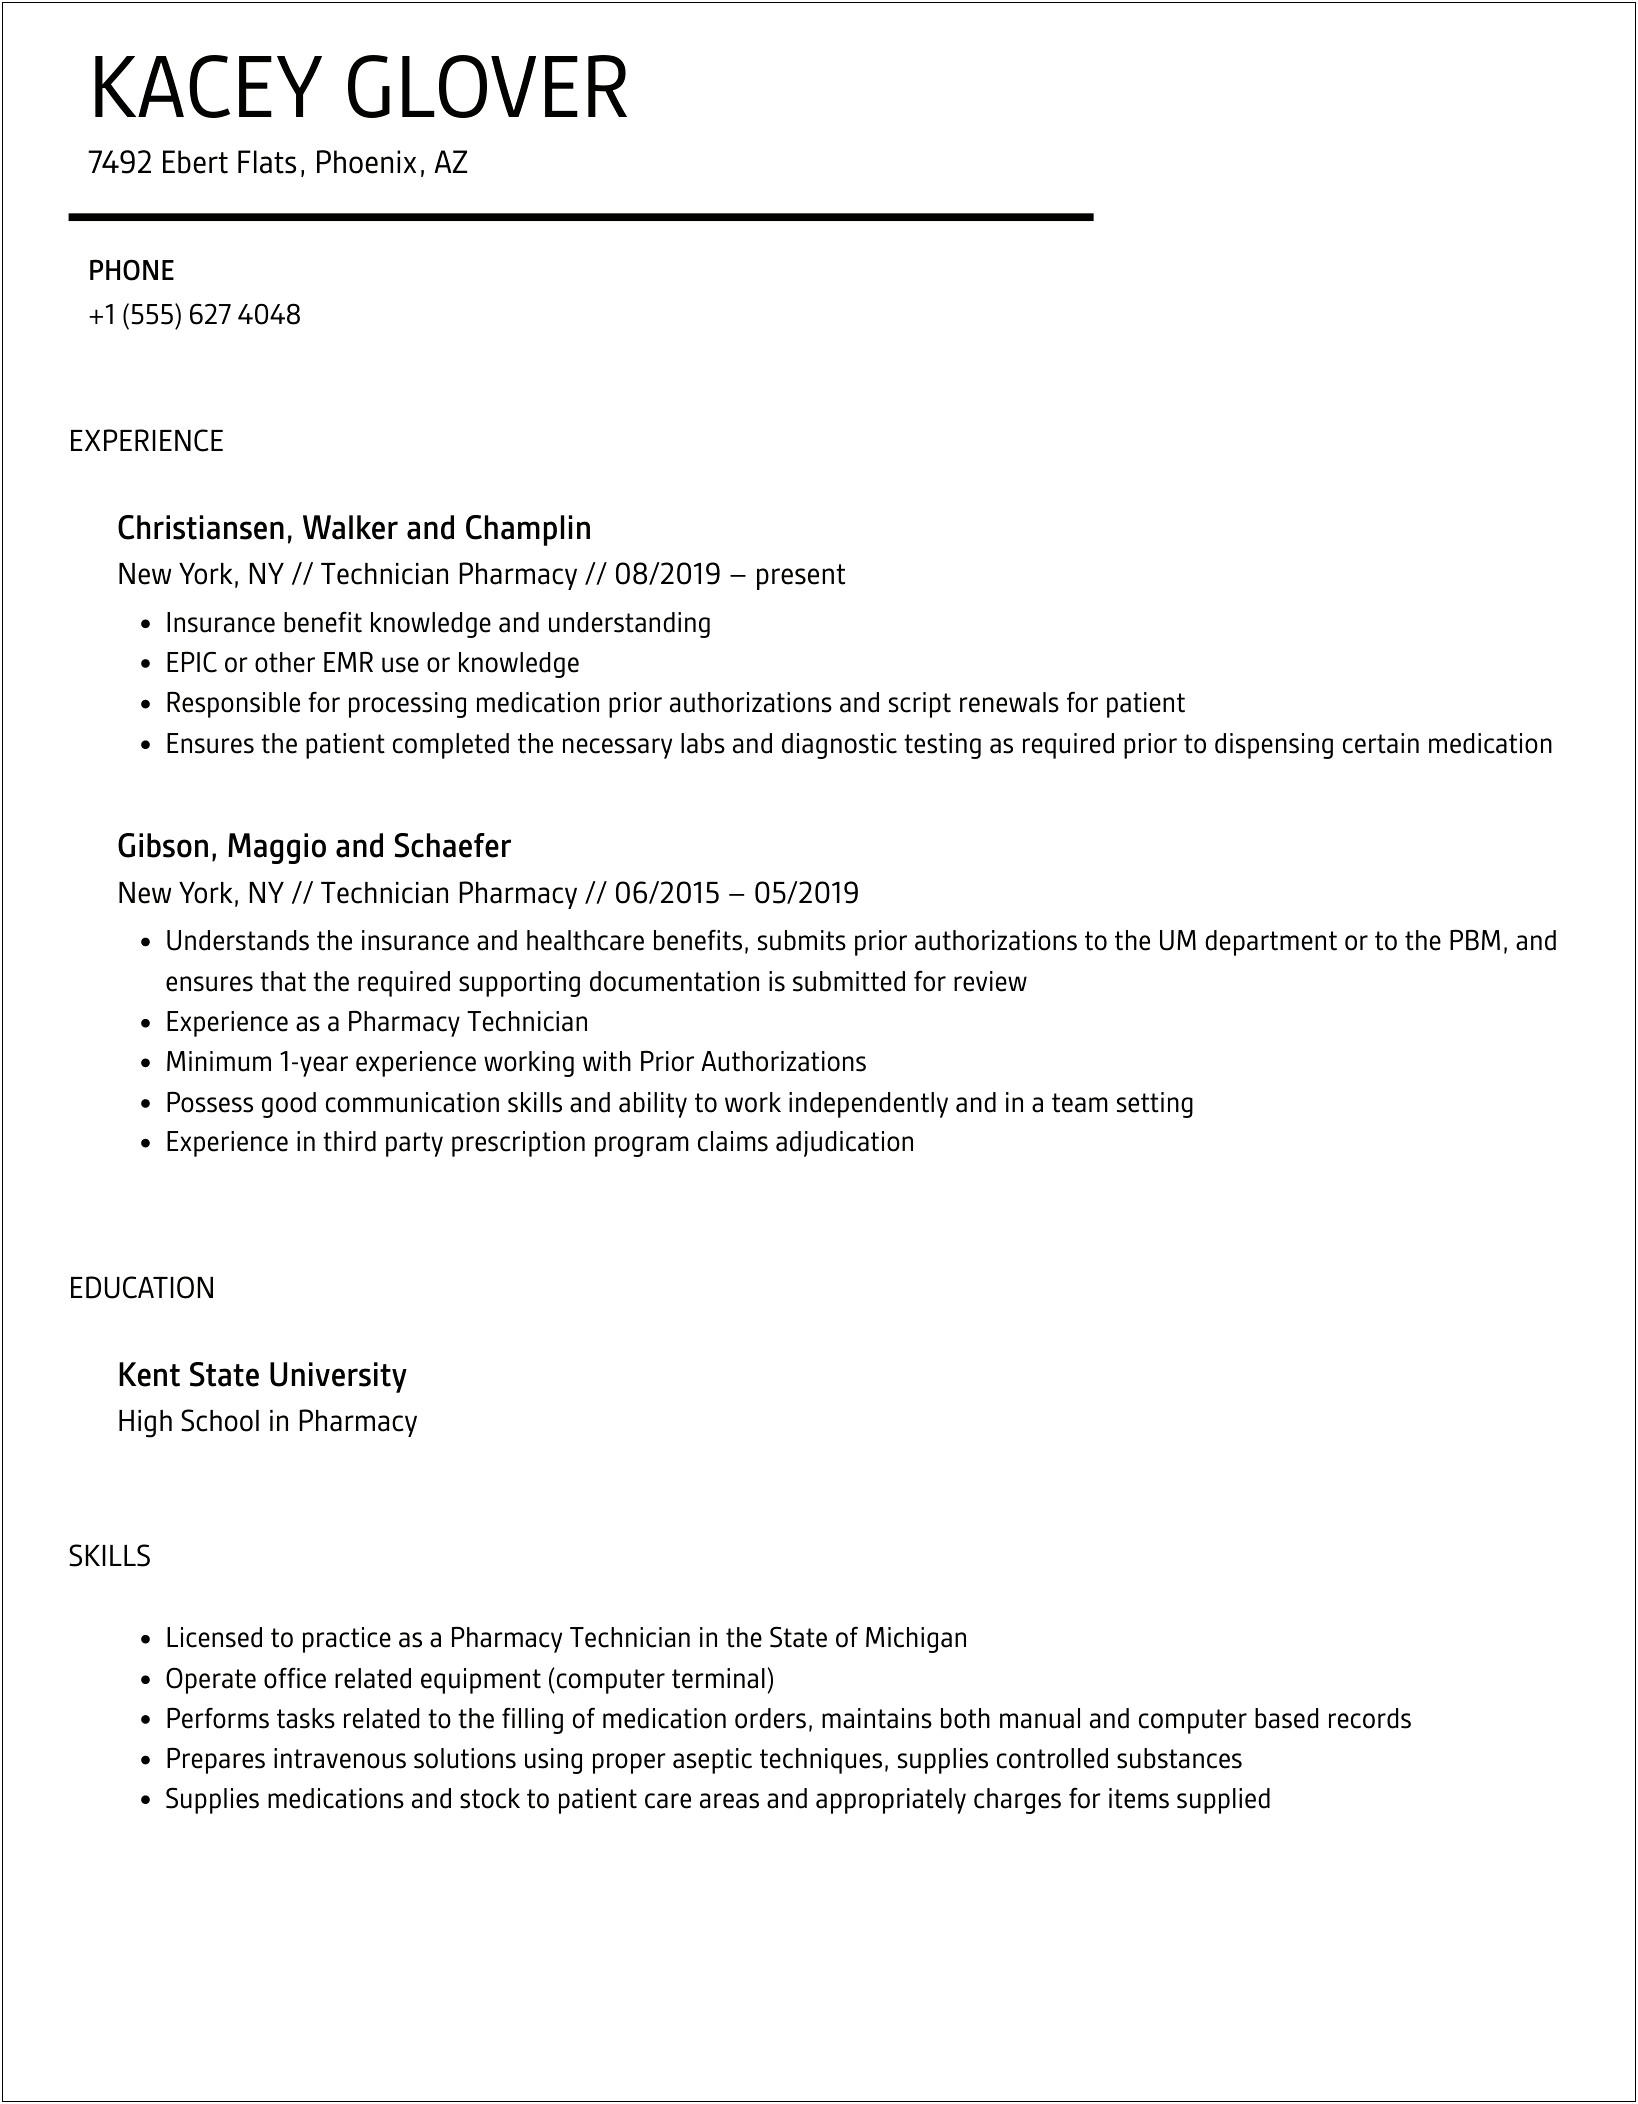 Resume For Non Experience Pharapmacy Tech